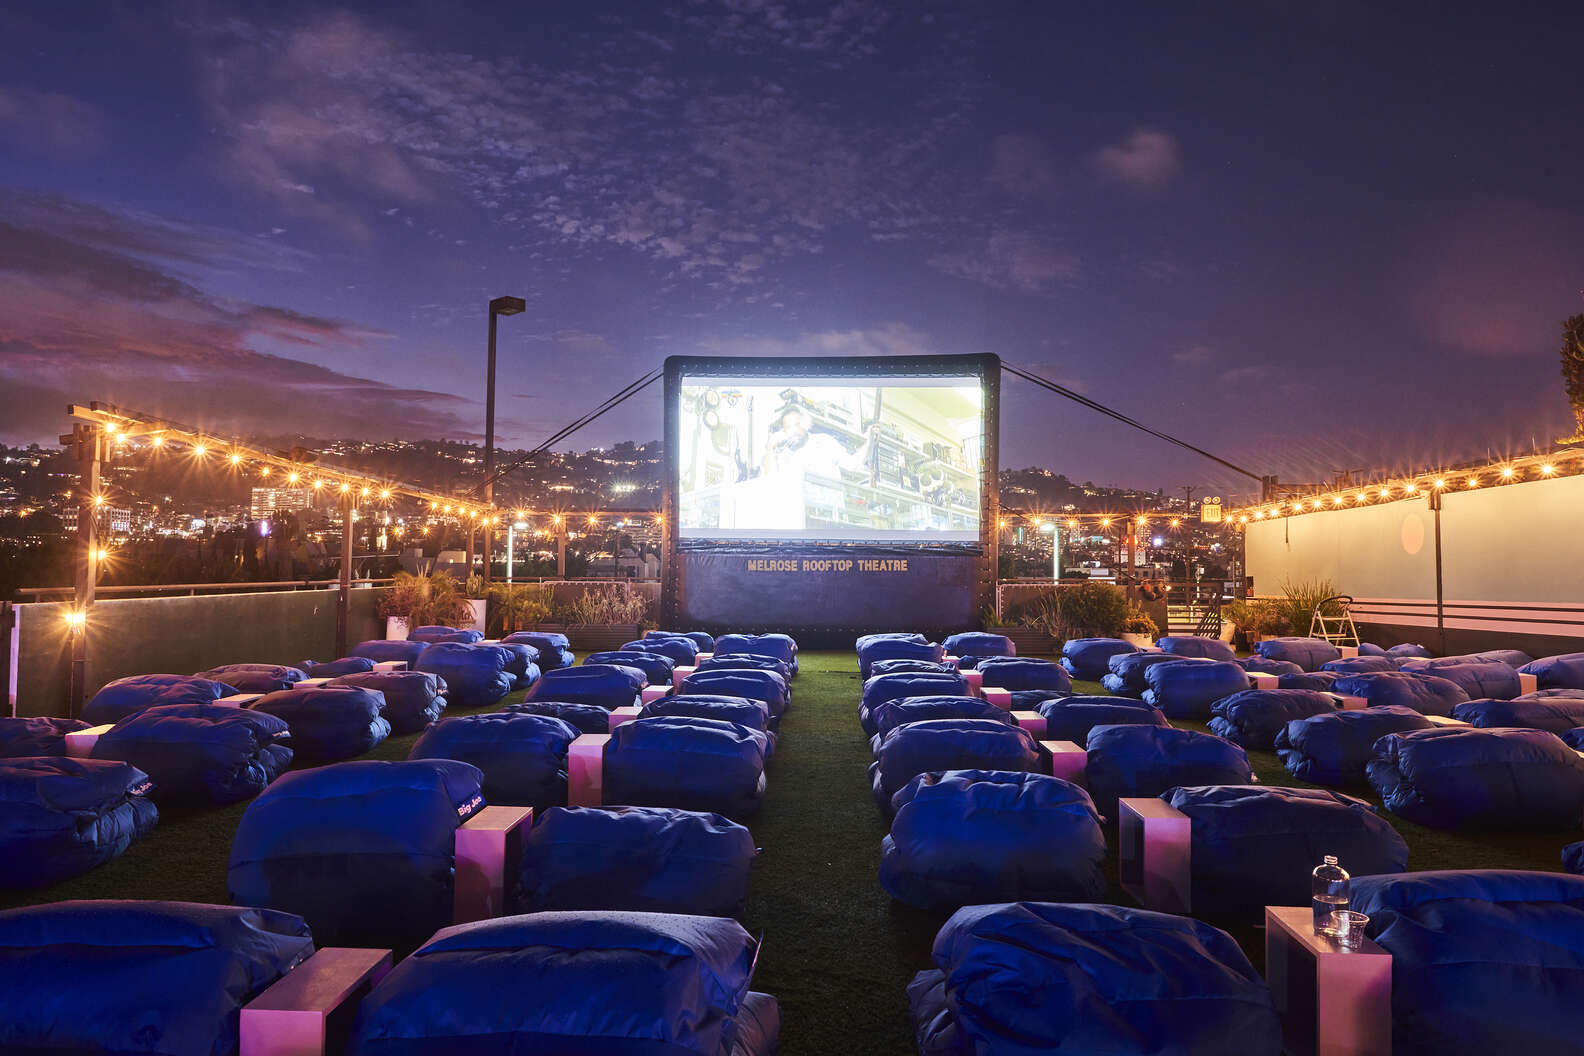 Photo courtesy of Melrose Rooftop Theatre